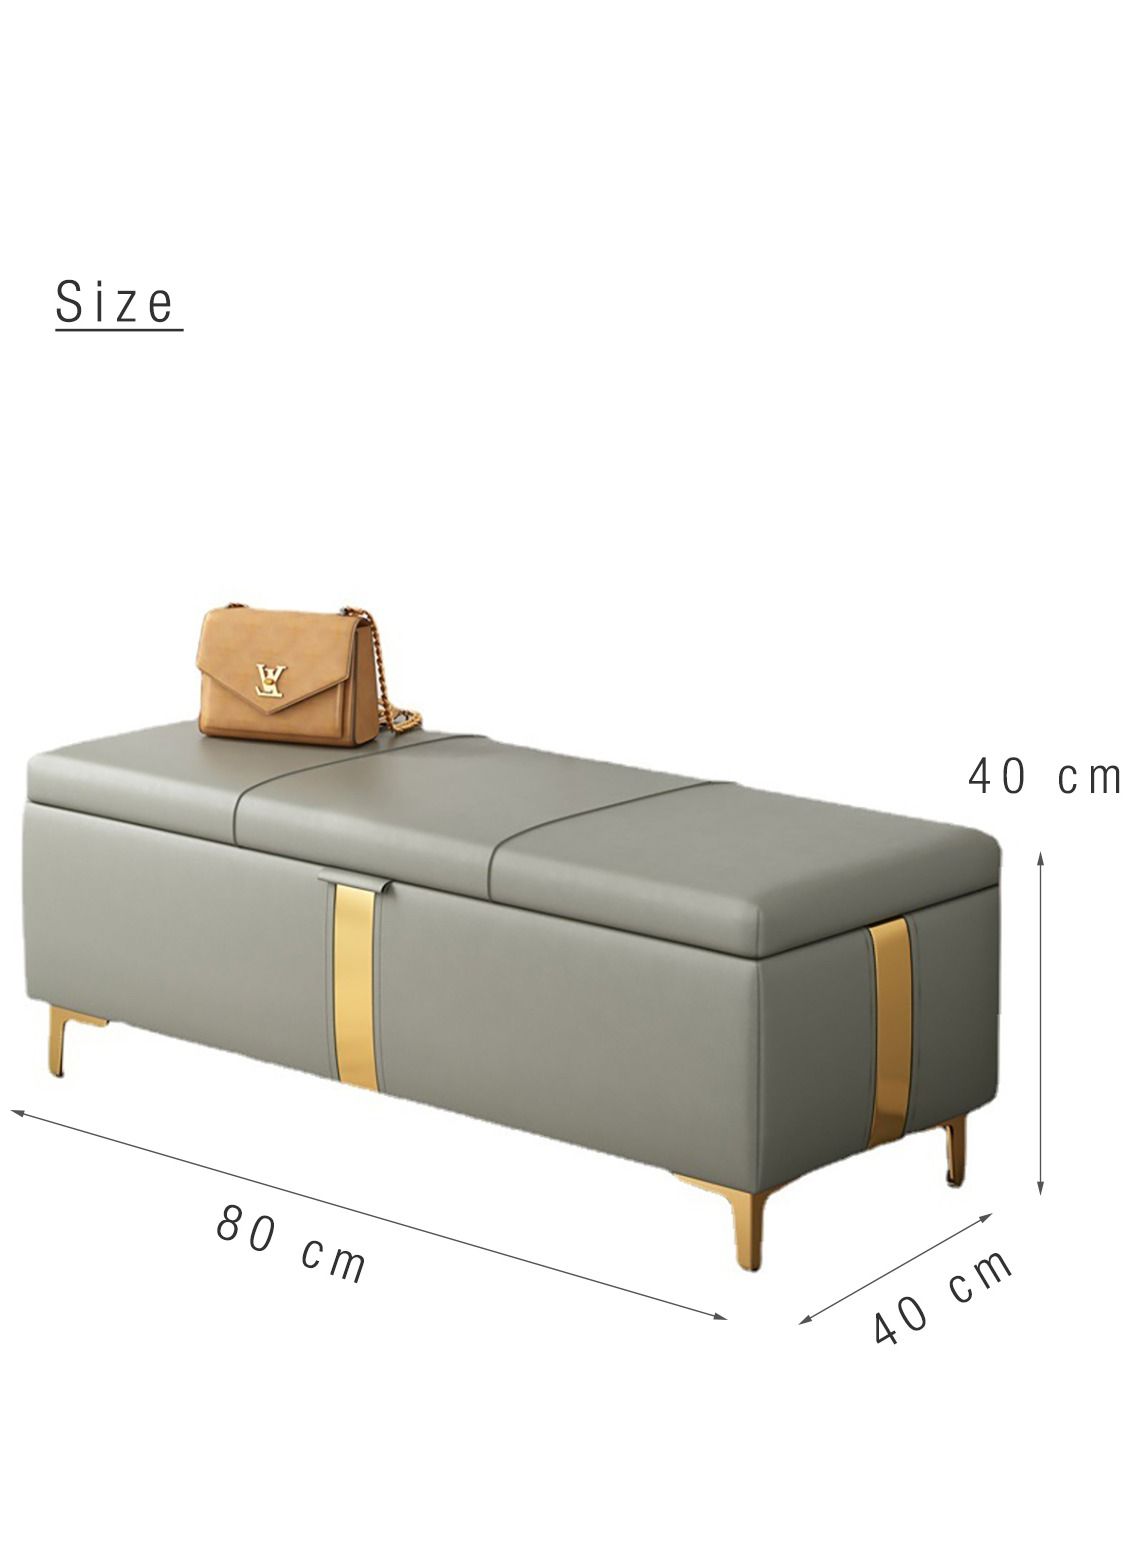 Comfortable Ottoman Bench Foot Rest Stool Cloth Change Shoes Stool Door Sofa Decorative Footstool for Entryway Living Room Bedside Table Study Room Grey with Golden Colour H40xL80xW40 cm 